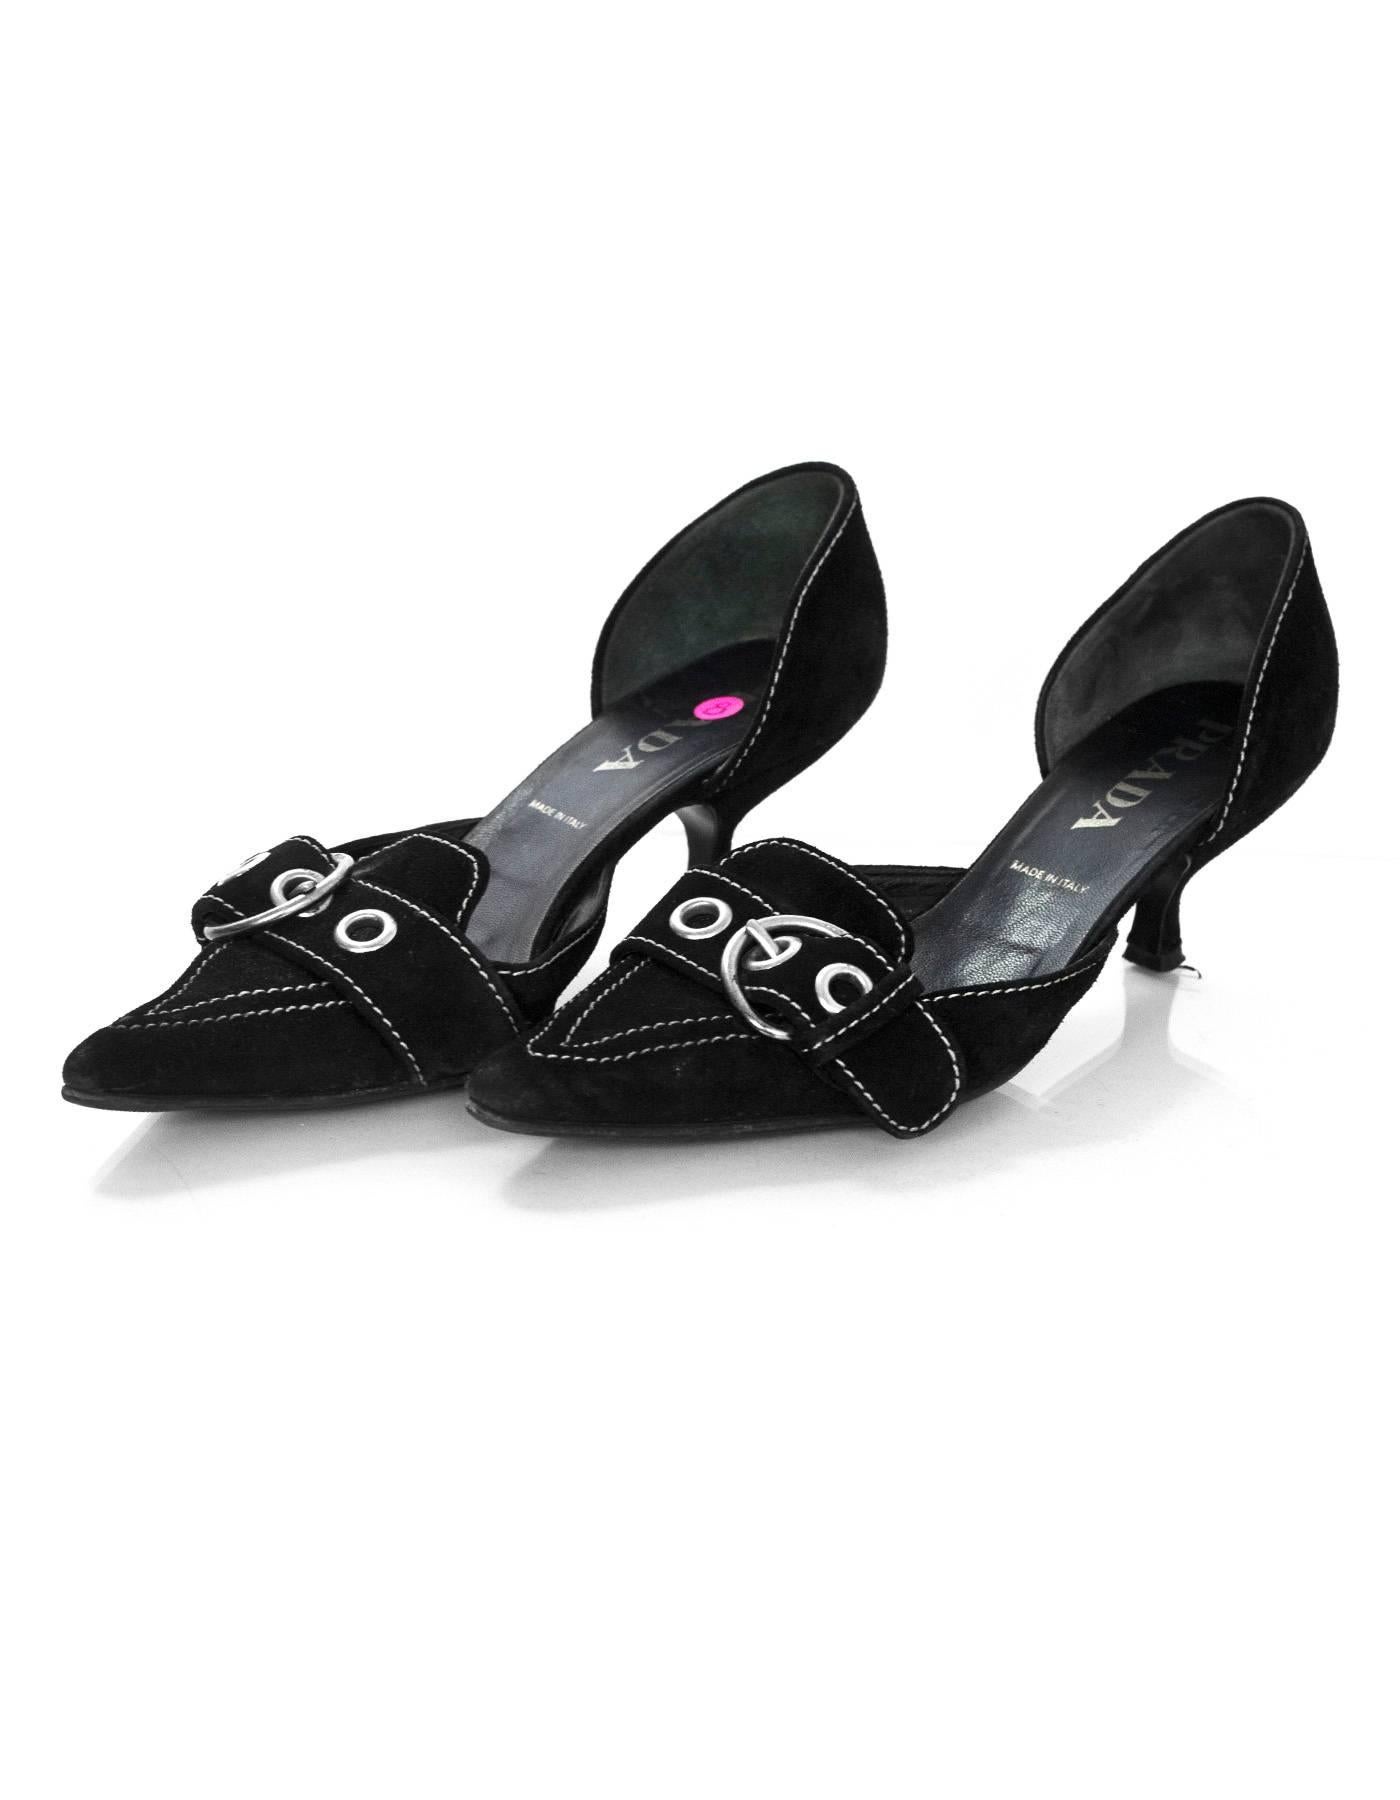 Prada Black Suede d'Osay Kitten Heels Sz 8

Made In: Italy
Color: Black
Materials: Suede
Closure/Opening: Slide on
Sole Stamp: Prada Made in Italy
Overall Condition: Very good pre-owned condition with the exception of being re-soled, wear at insoles